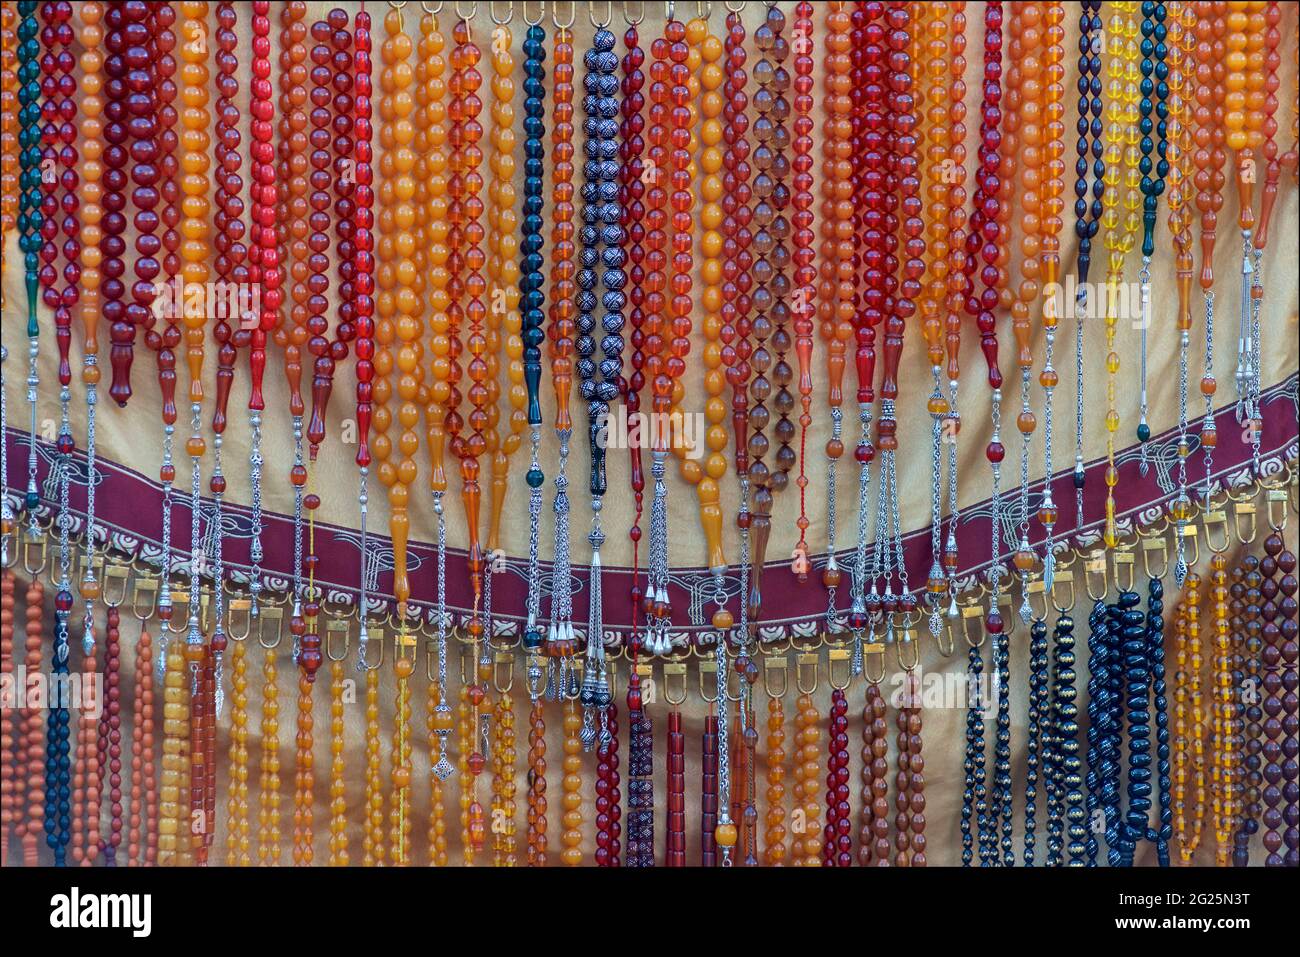 Detail of prayer beads / rosaries hanging up on a market stall for sale, Beyazit Square, Istanbul, Turkey. Stock Photo